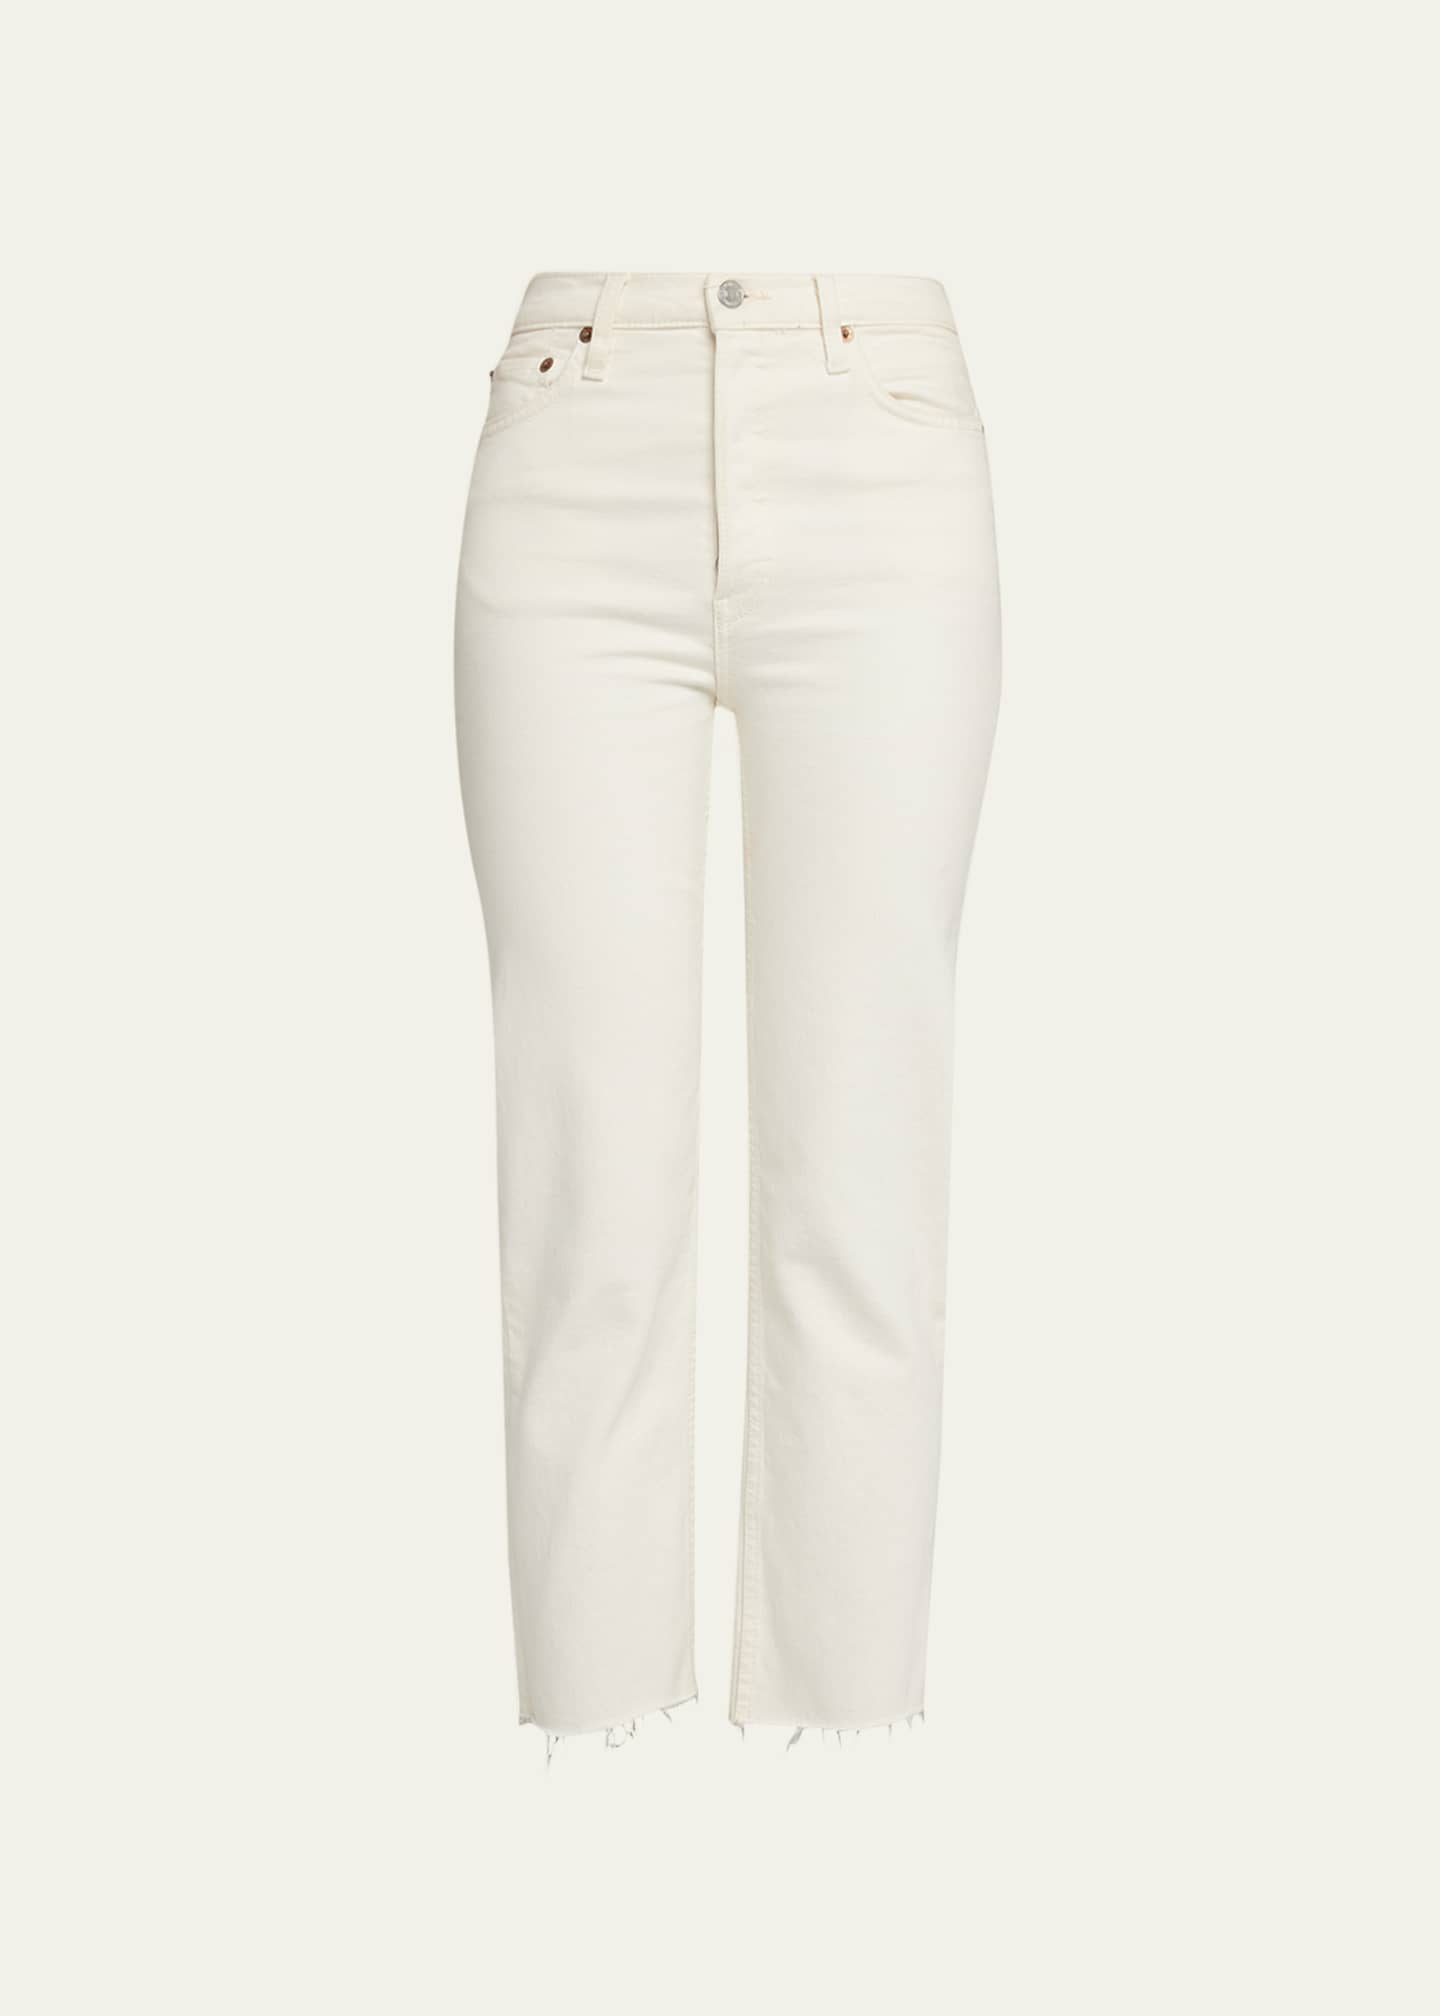 RE/DONE 70s Stovepipe Ankle Jeans - Bergdorf Goodman